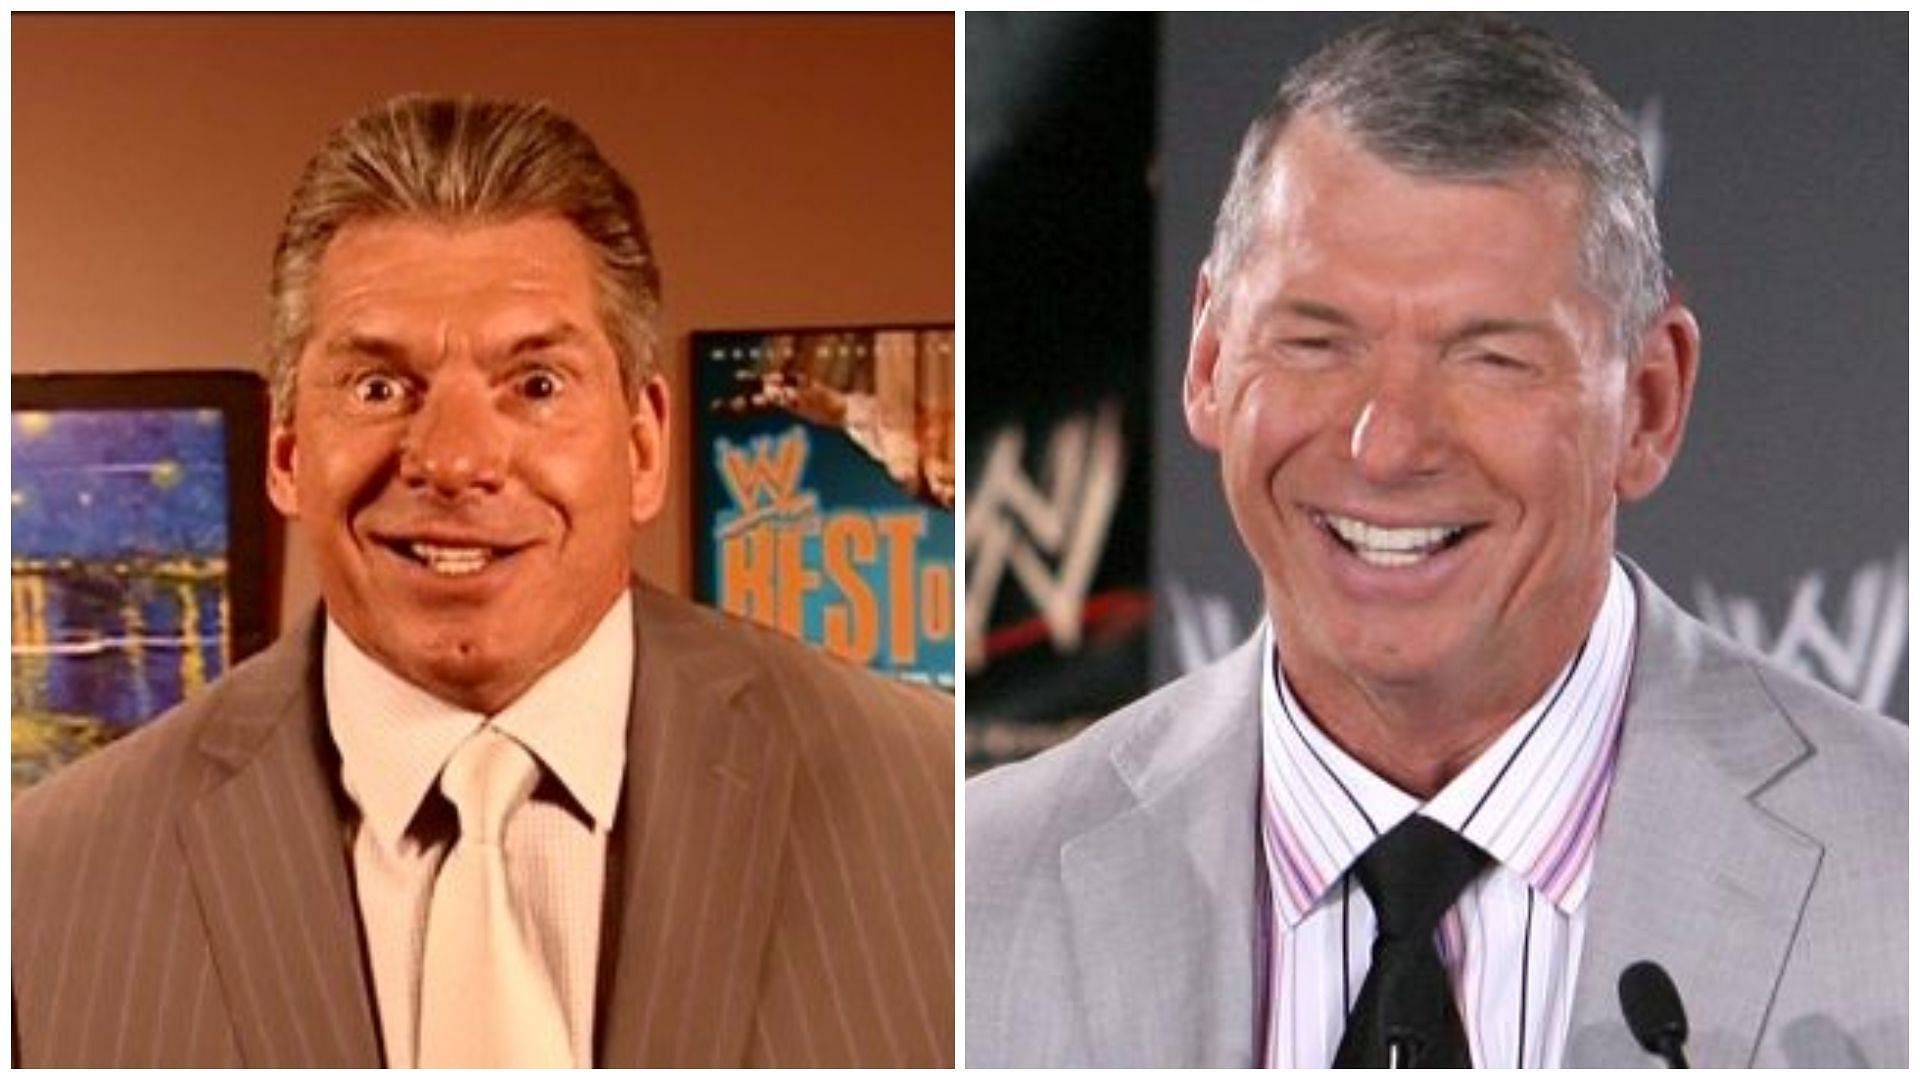 Vince McMahon recently returned to WWE as board member.